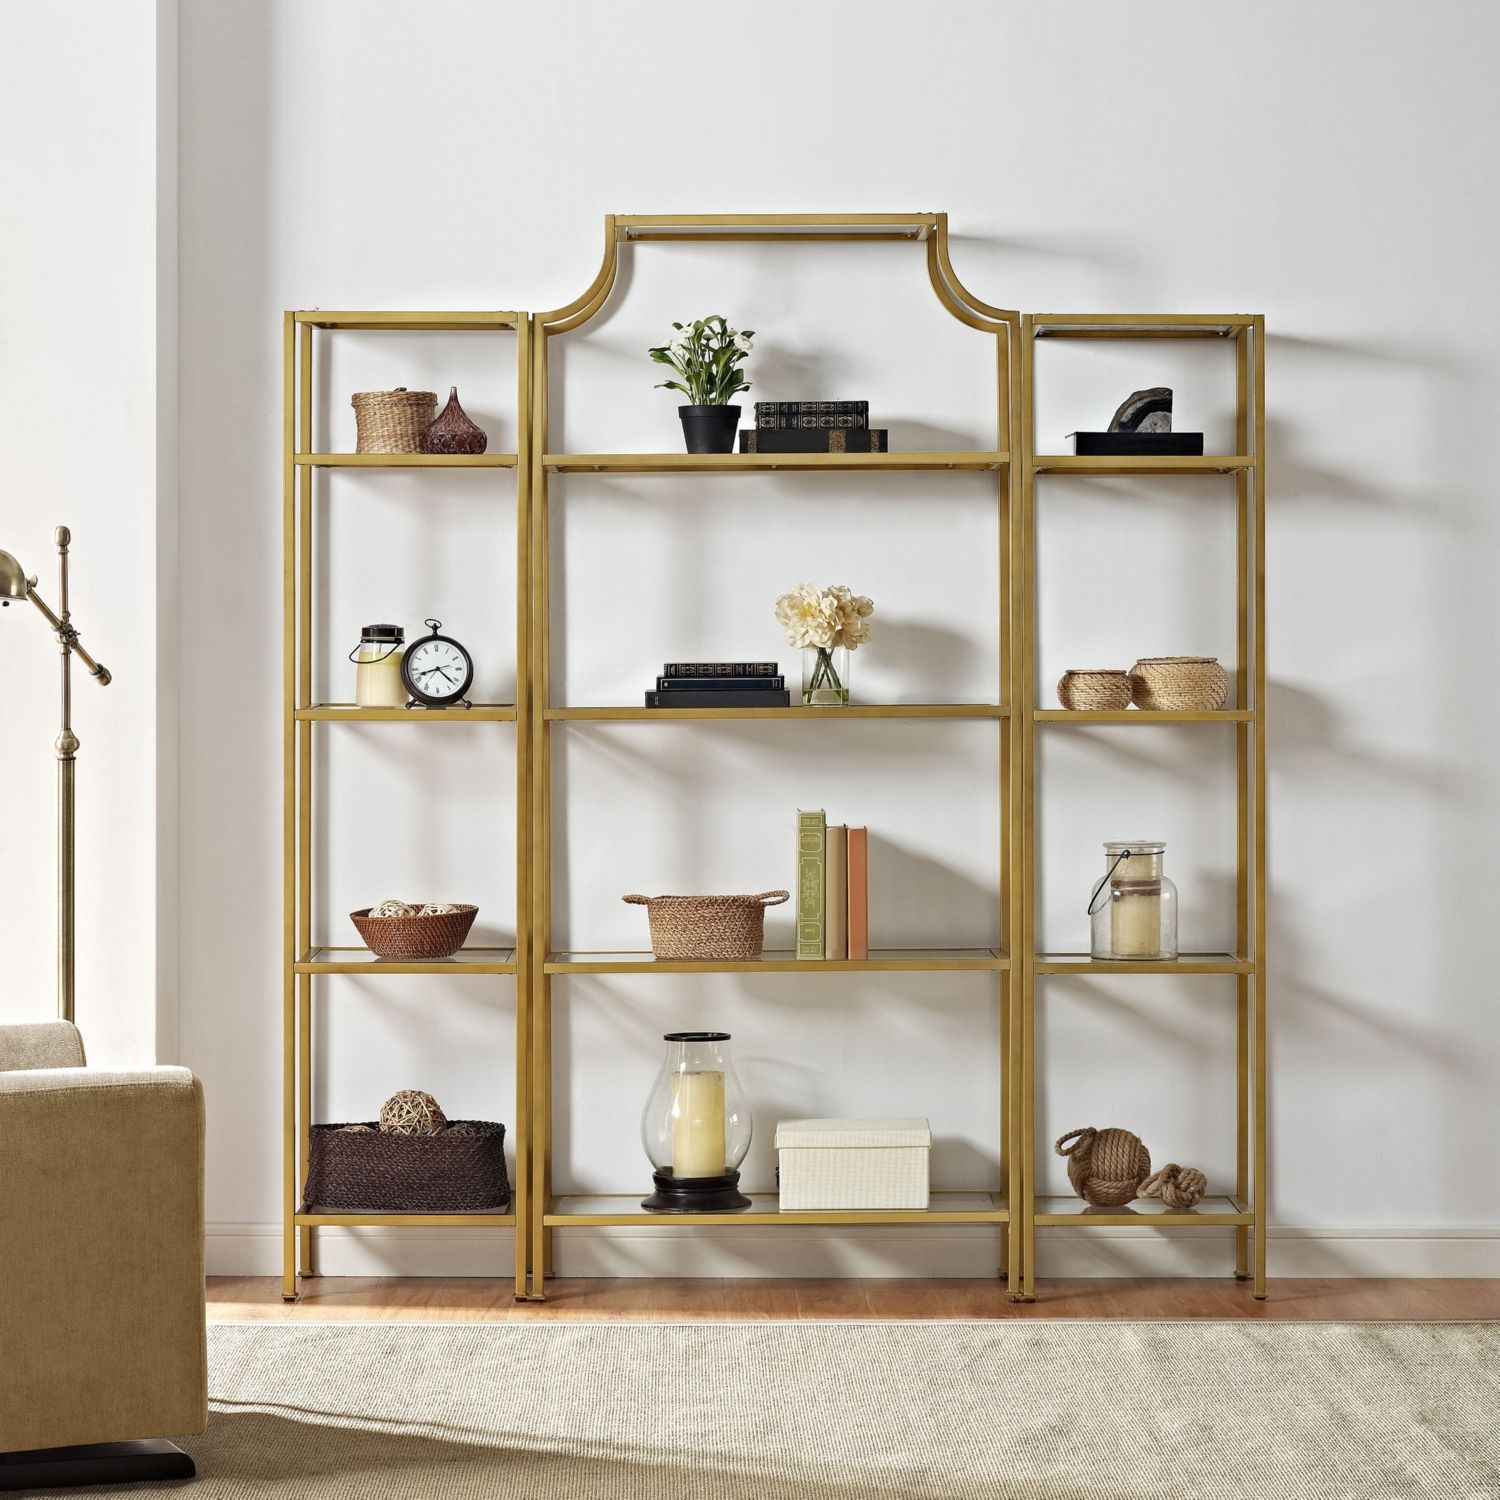 Crosley Kf65004gl Aimee 3 Piece Etagere Bookcase Set In Antique Gold Finish  & Tempered Glass Pertaining To Antique Gold Bookcases (View 13 of 15)